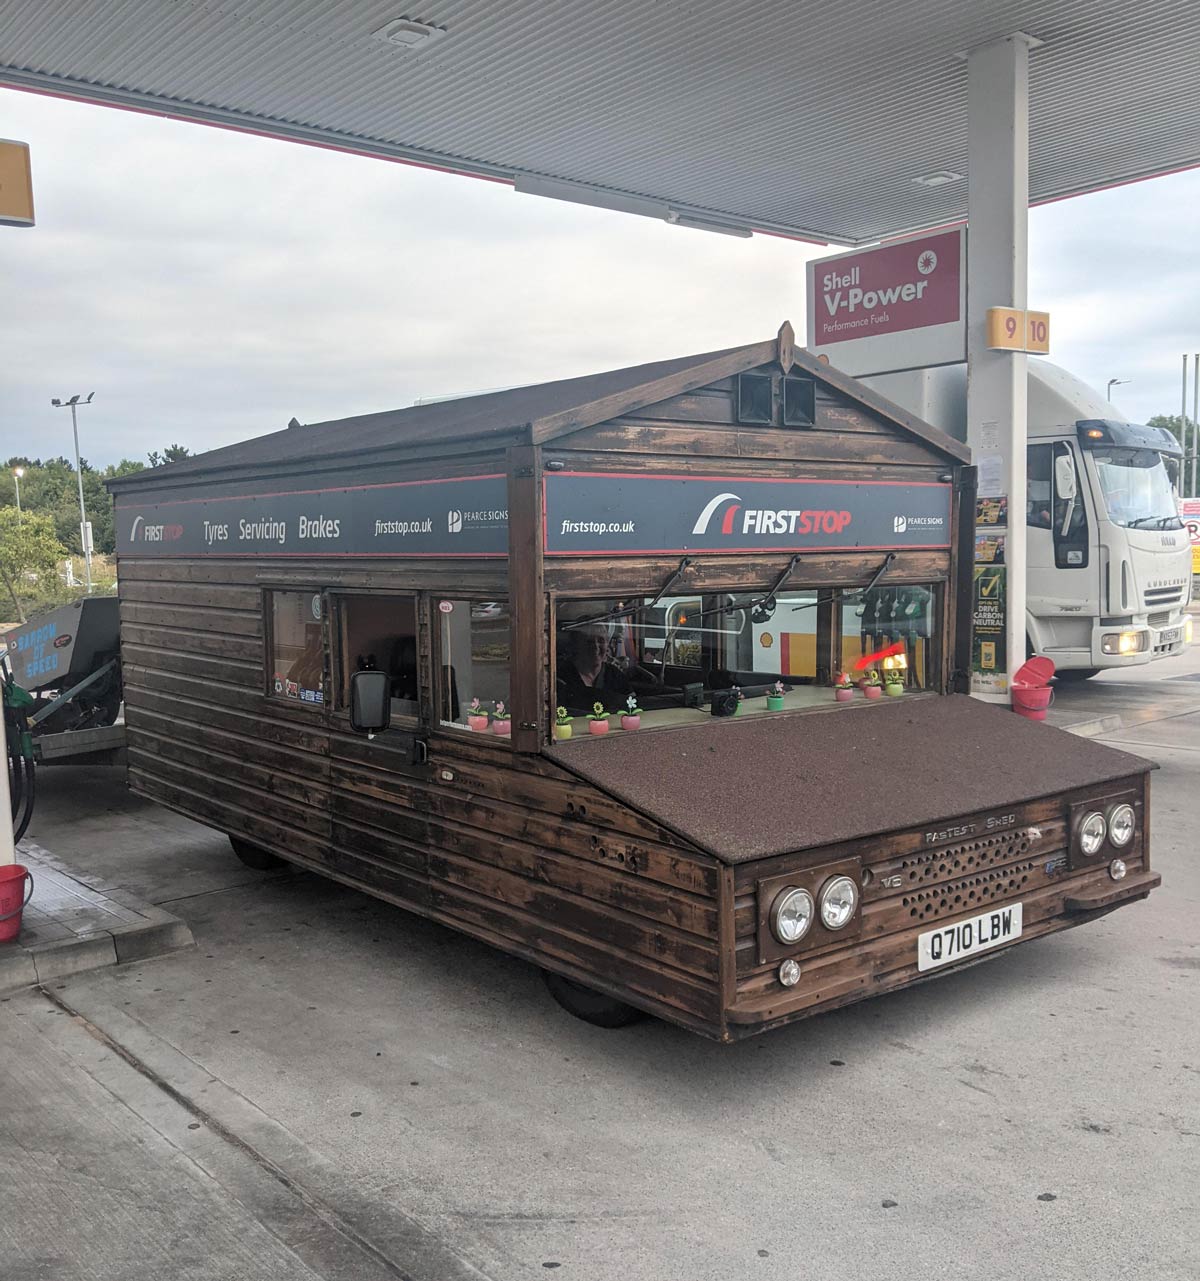 Worlds fastest shed I ran into at a service station. 114.7 mph top speed, 3 world records. The wheel barrow is also a record holder